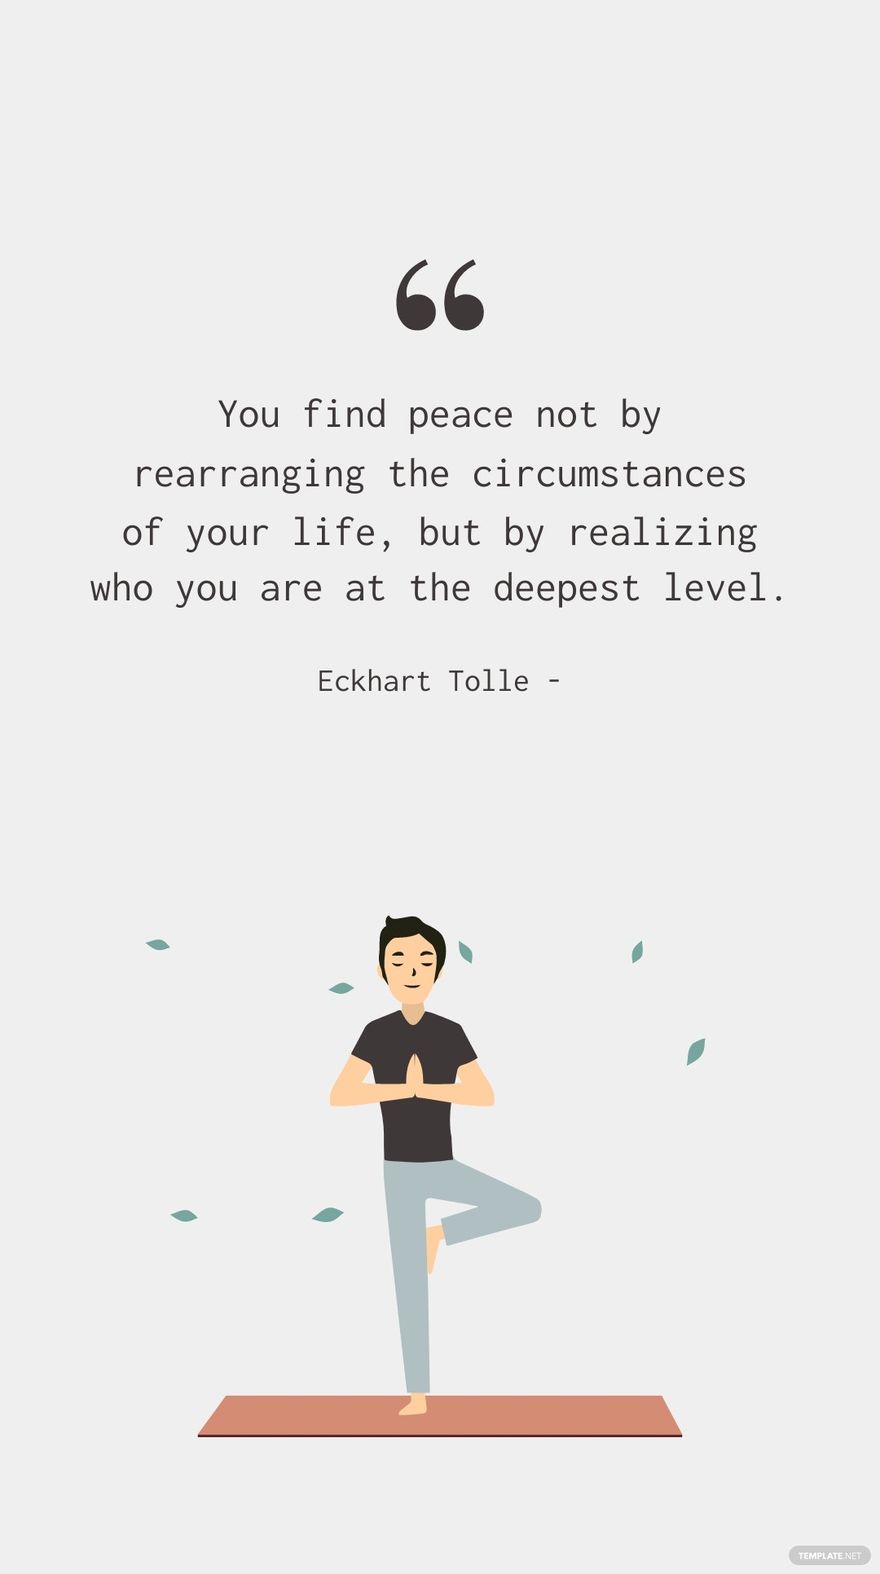 Eckhart Tolle - You find peace not by rearranging the circumstances of your life, but by realizing who you are at the deepest level. in JPG